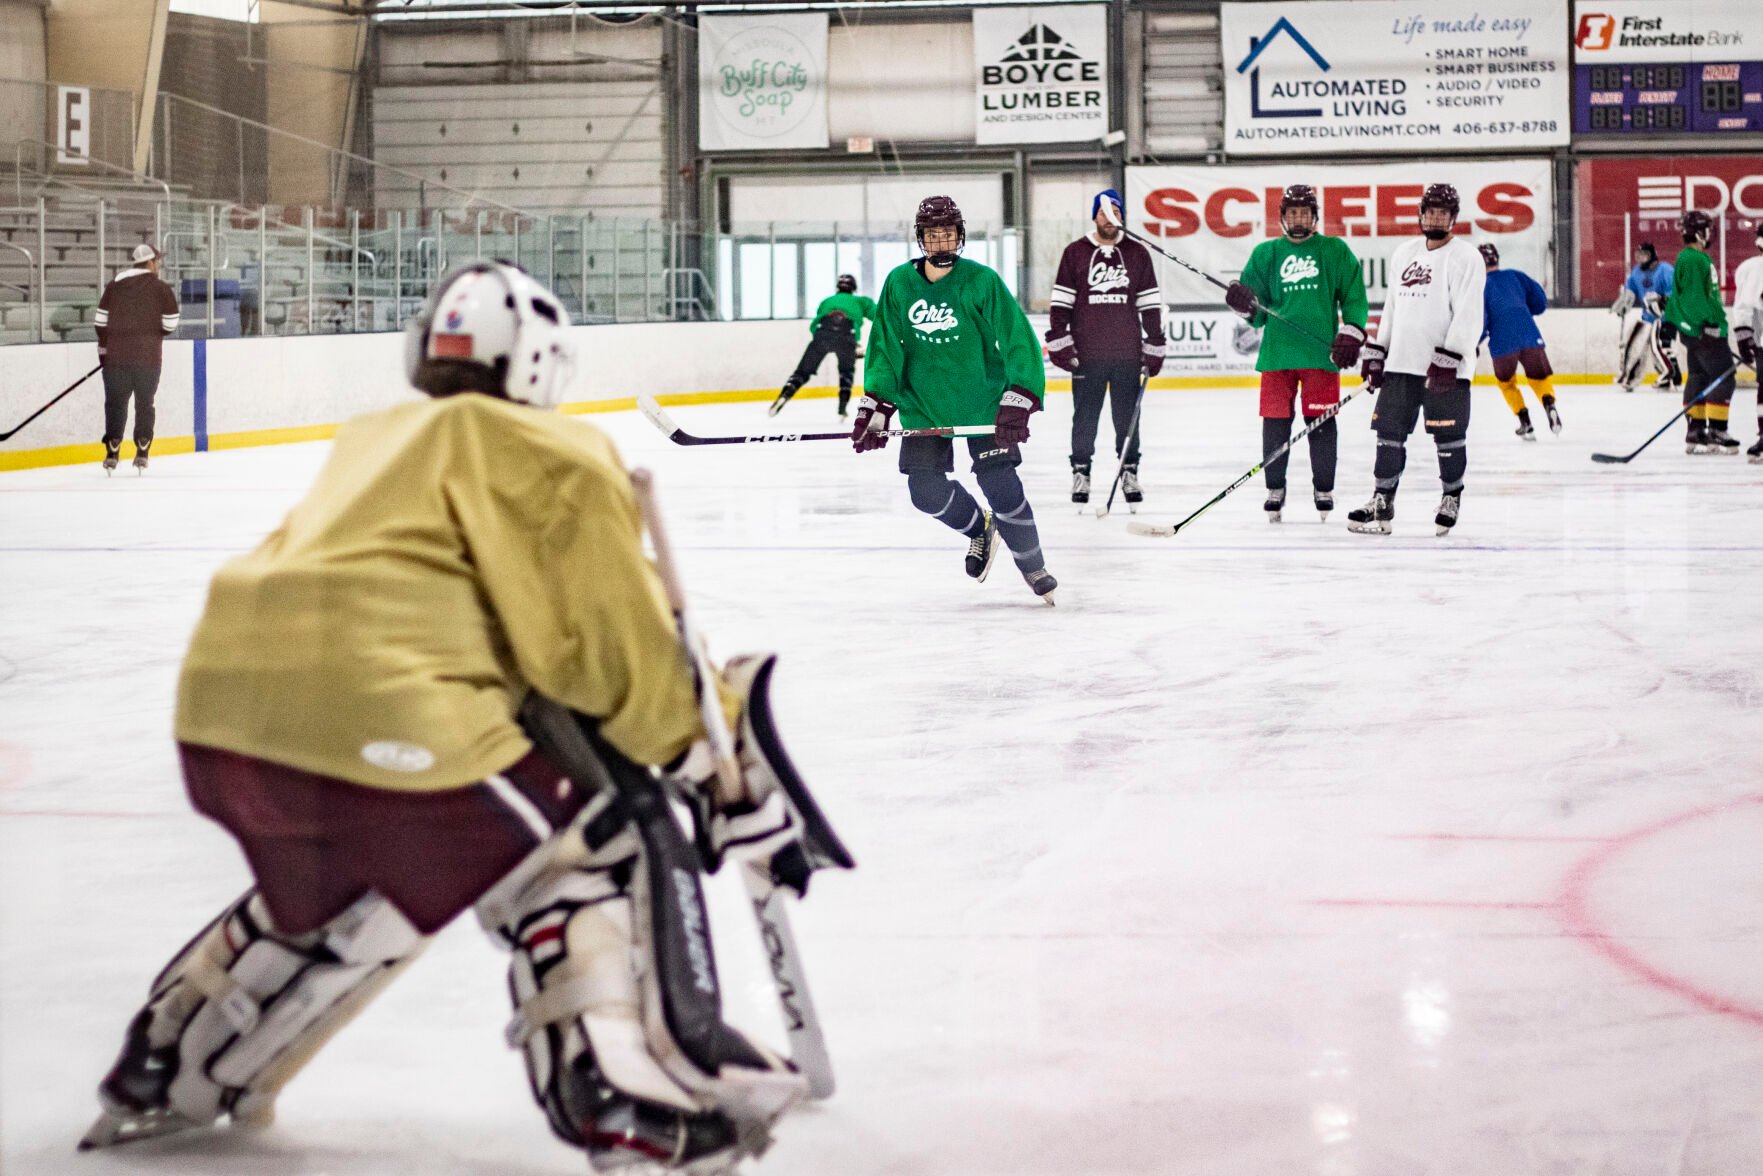 Griz hockey prepares for games after successful first year Sports montanakaimin